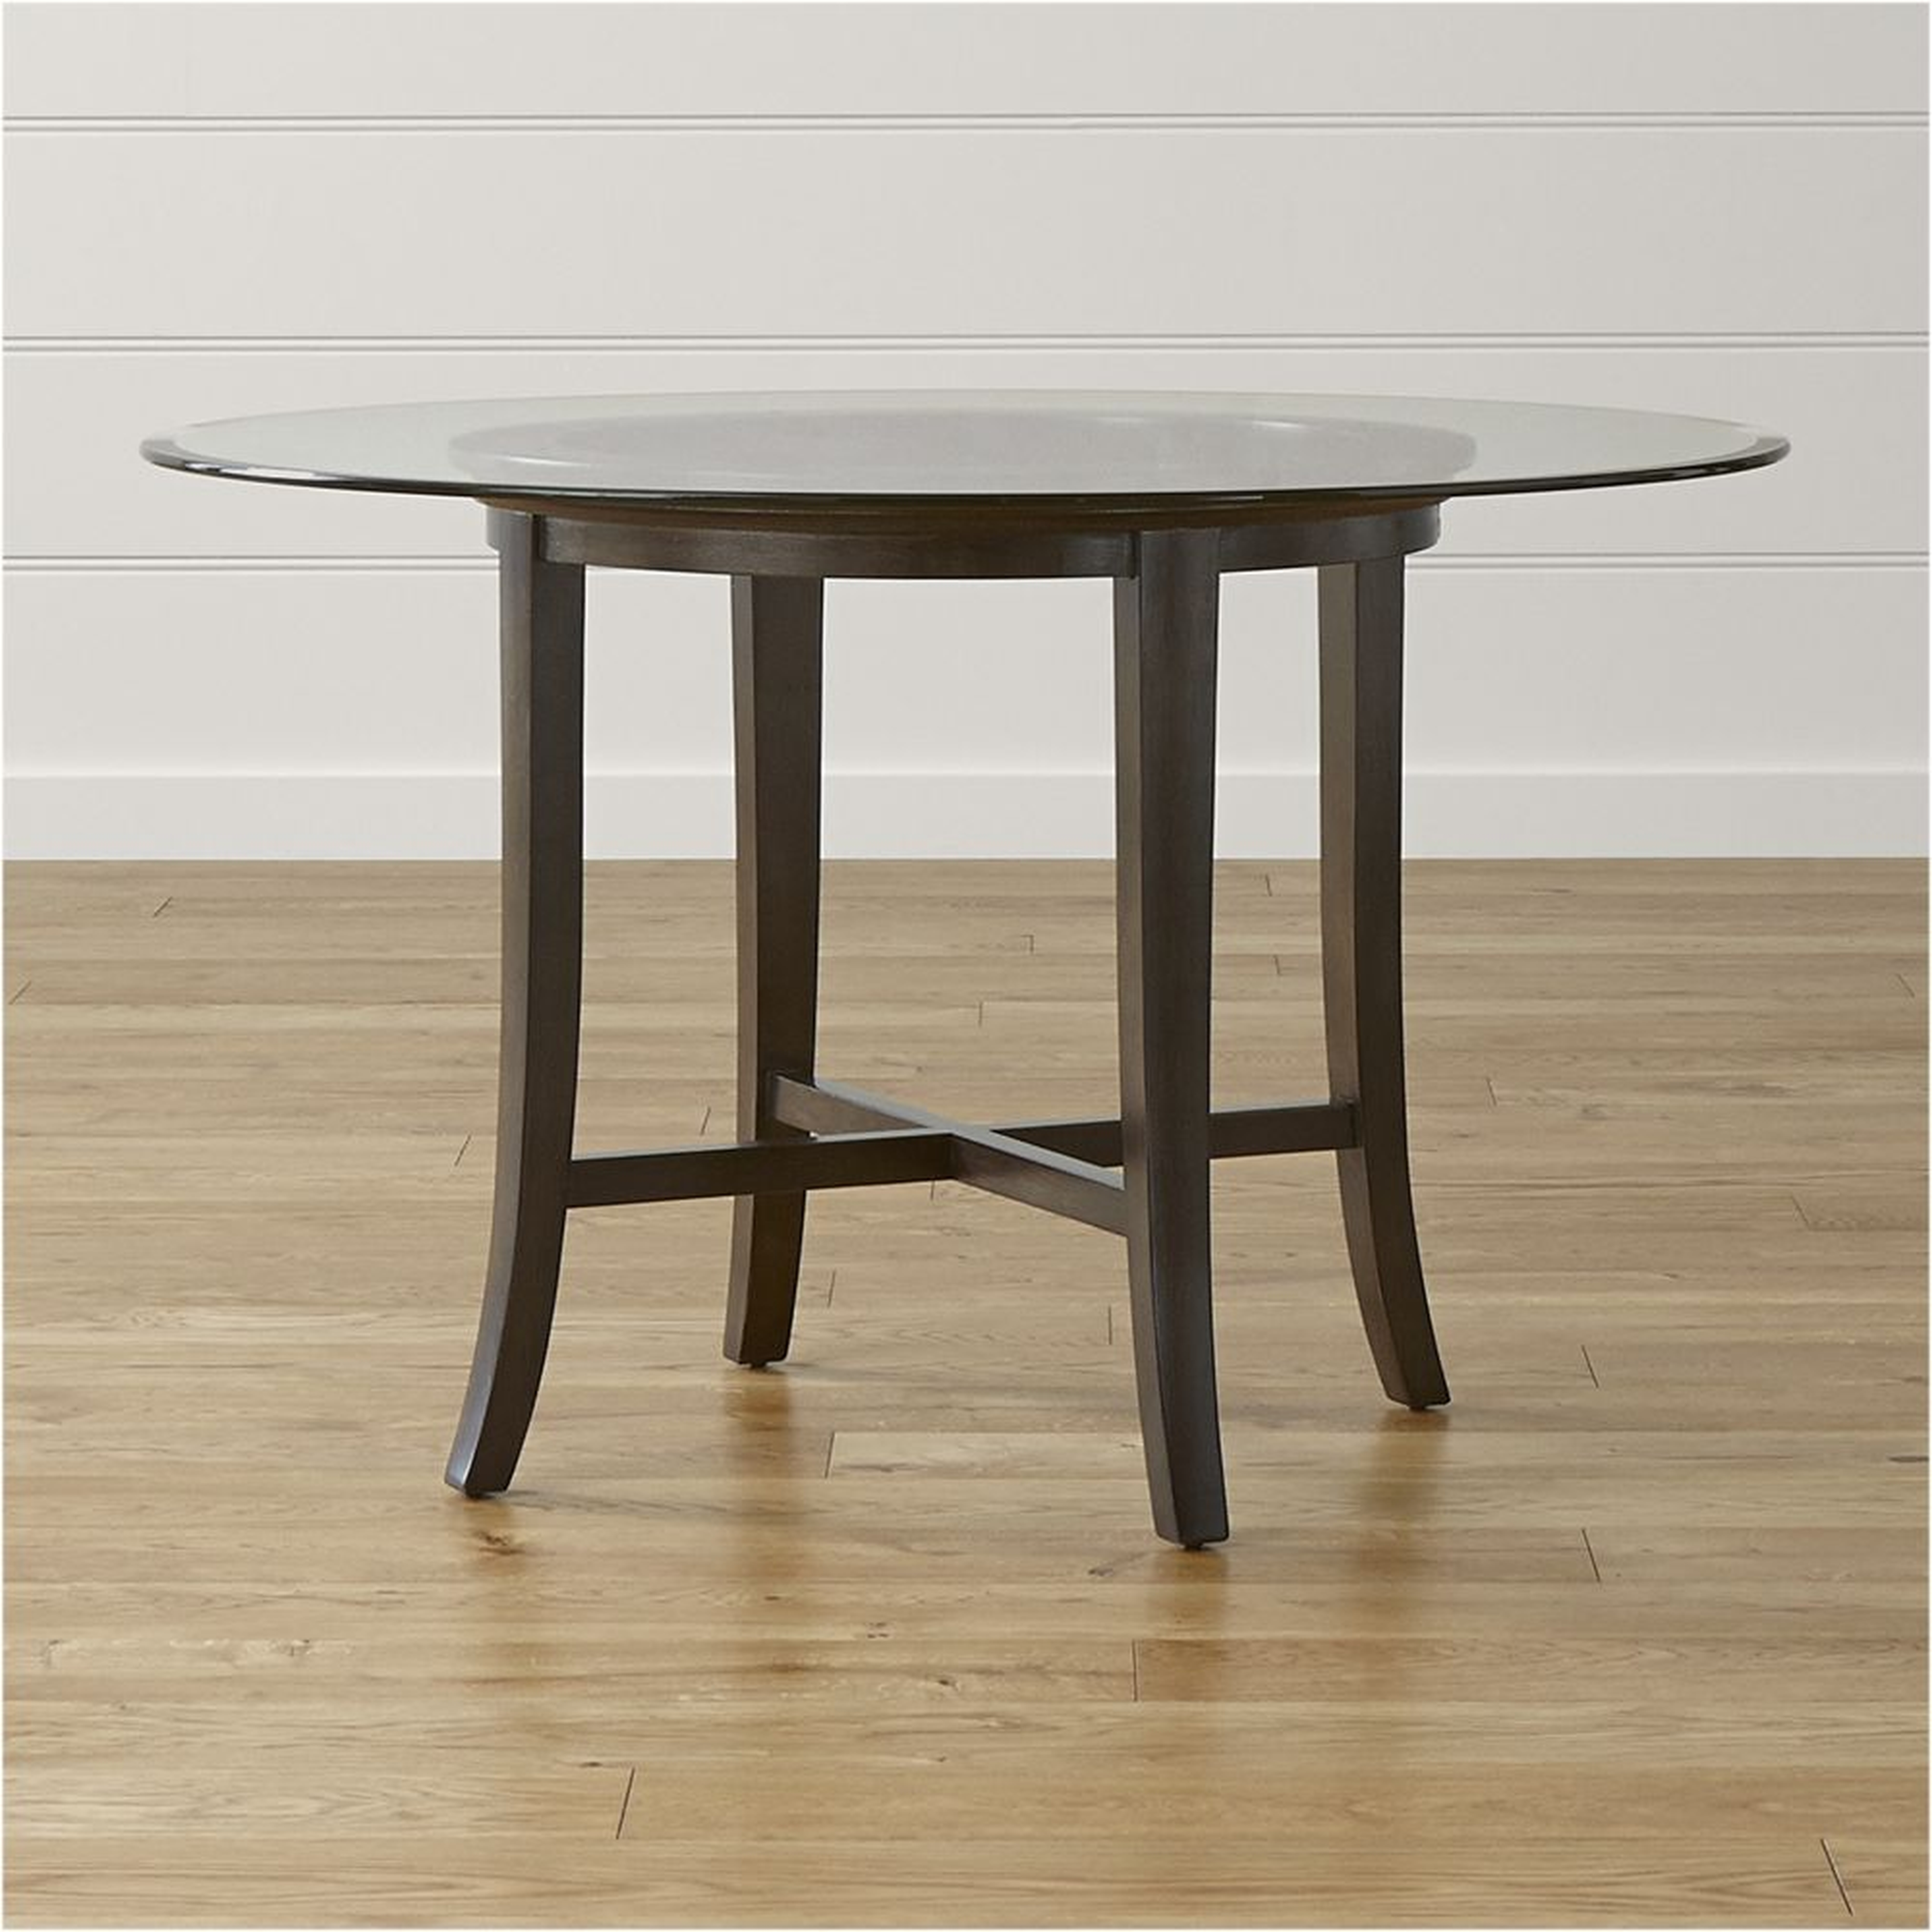 Halo Ebony Round Dining Table with 48" Glass Top - Ebony - Crate and Barrel